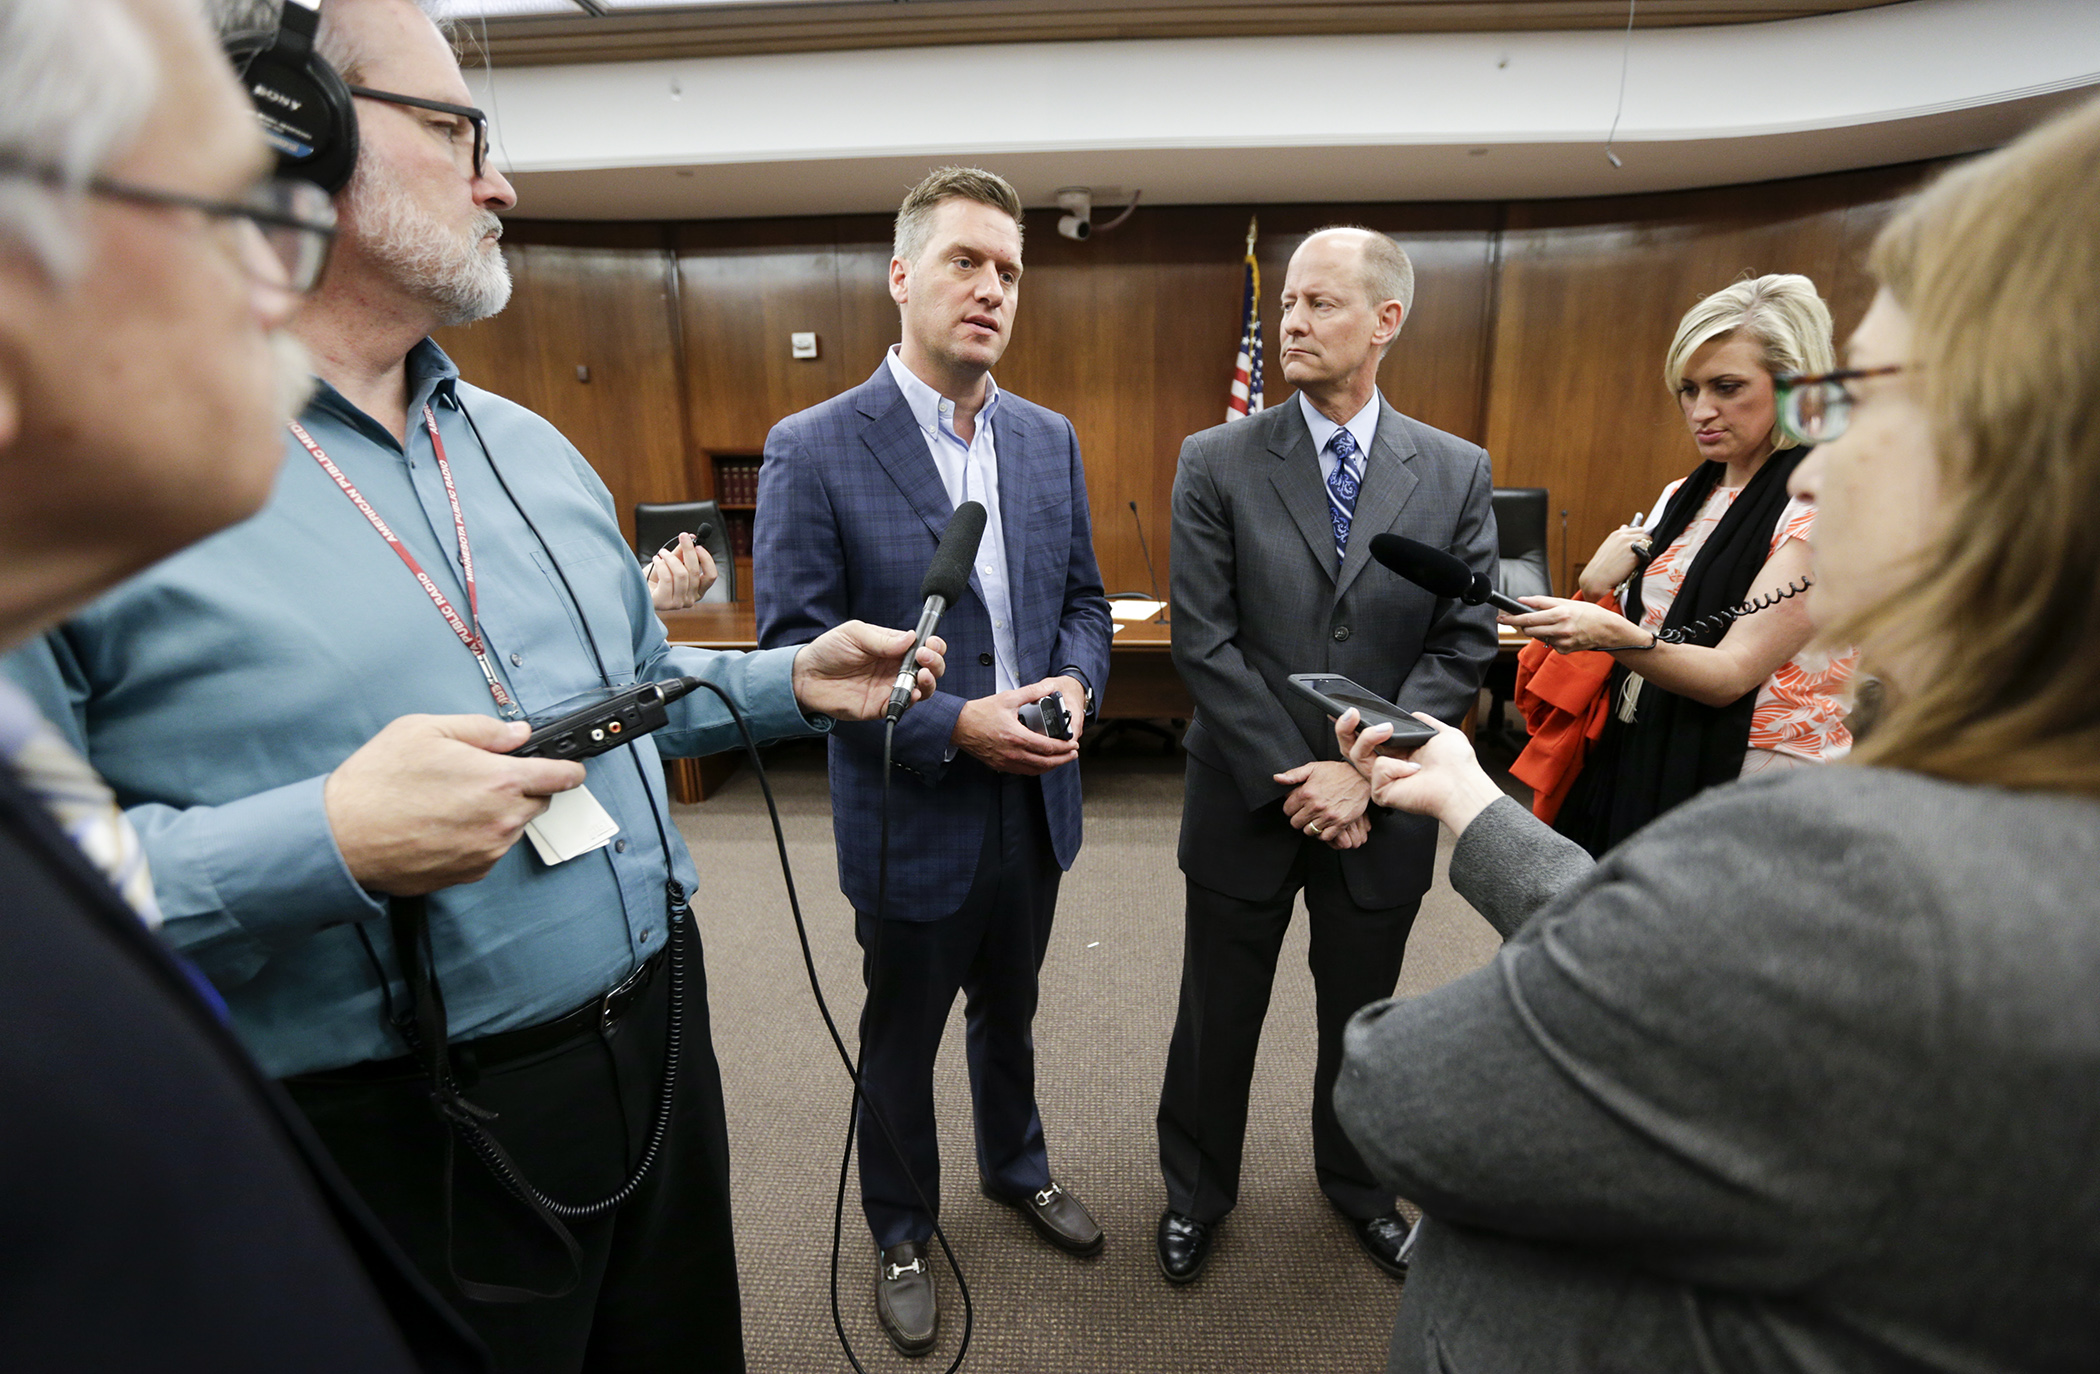 House Speaker Kurt Daudt and Senate Majority Leader Paul Gazelka speak with the media after a June 2 meeting of the Legislative Coordinating Commission, which voted 7-2 to retain outside counsel in litigation arising from the governor’s line-item vetoes of funding for the House and Senate. Photo by Paul Battaglia